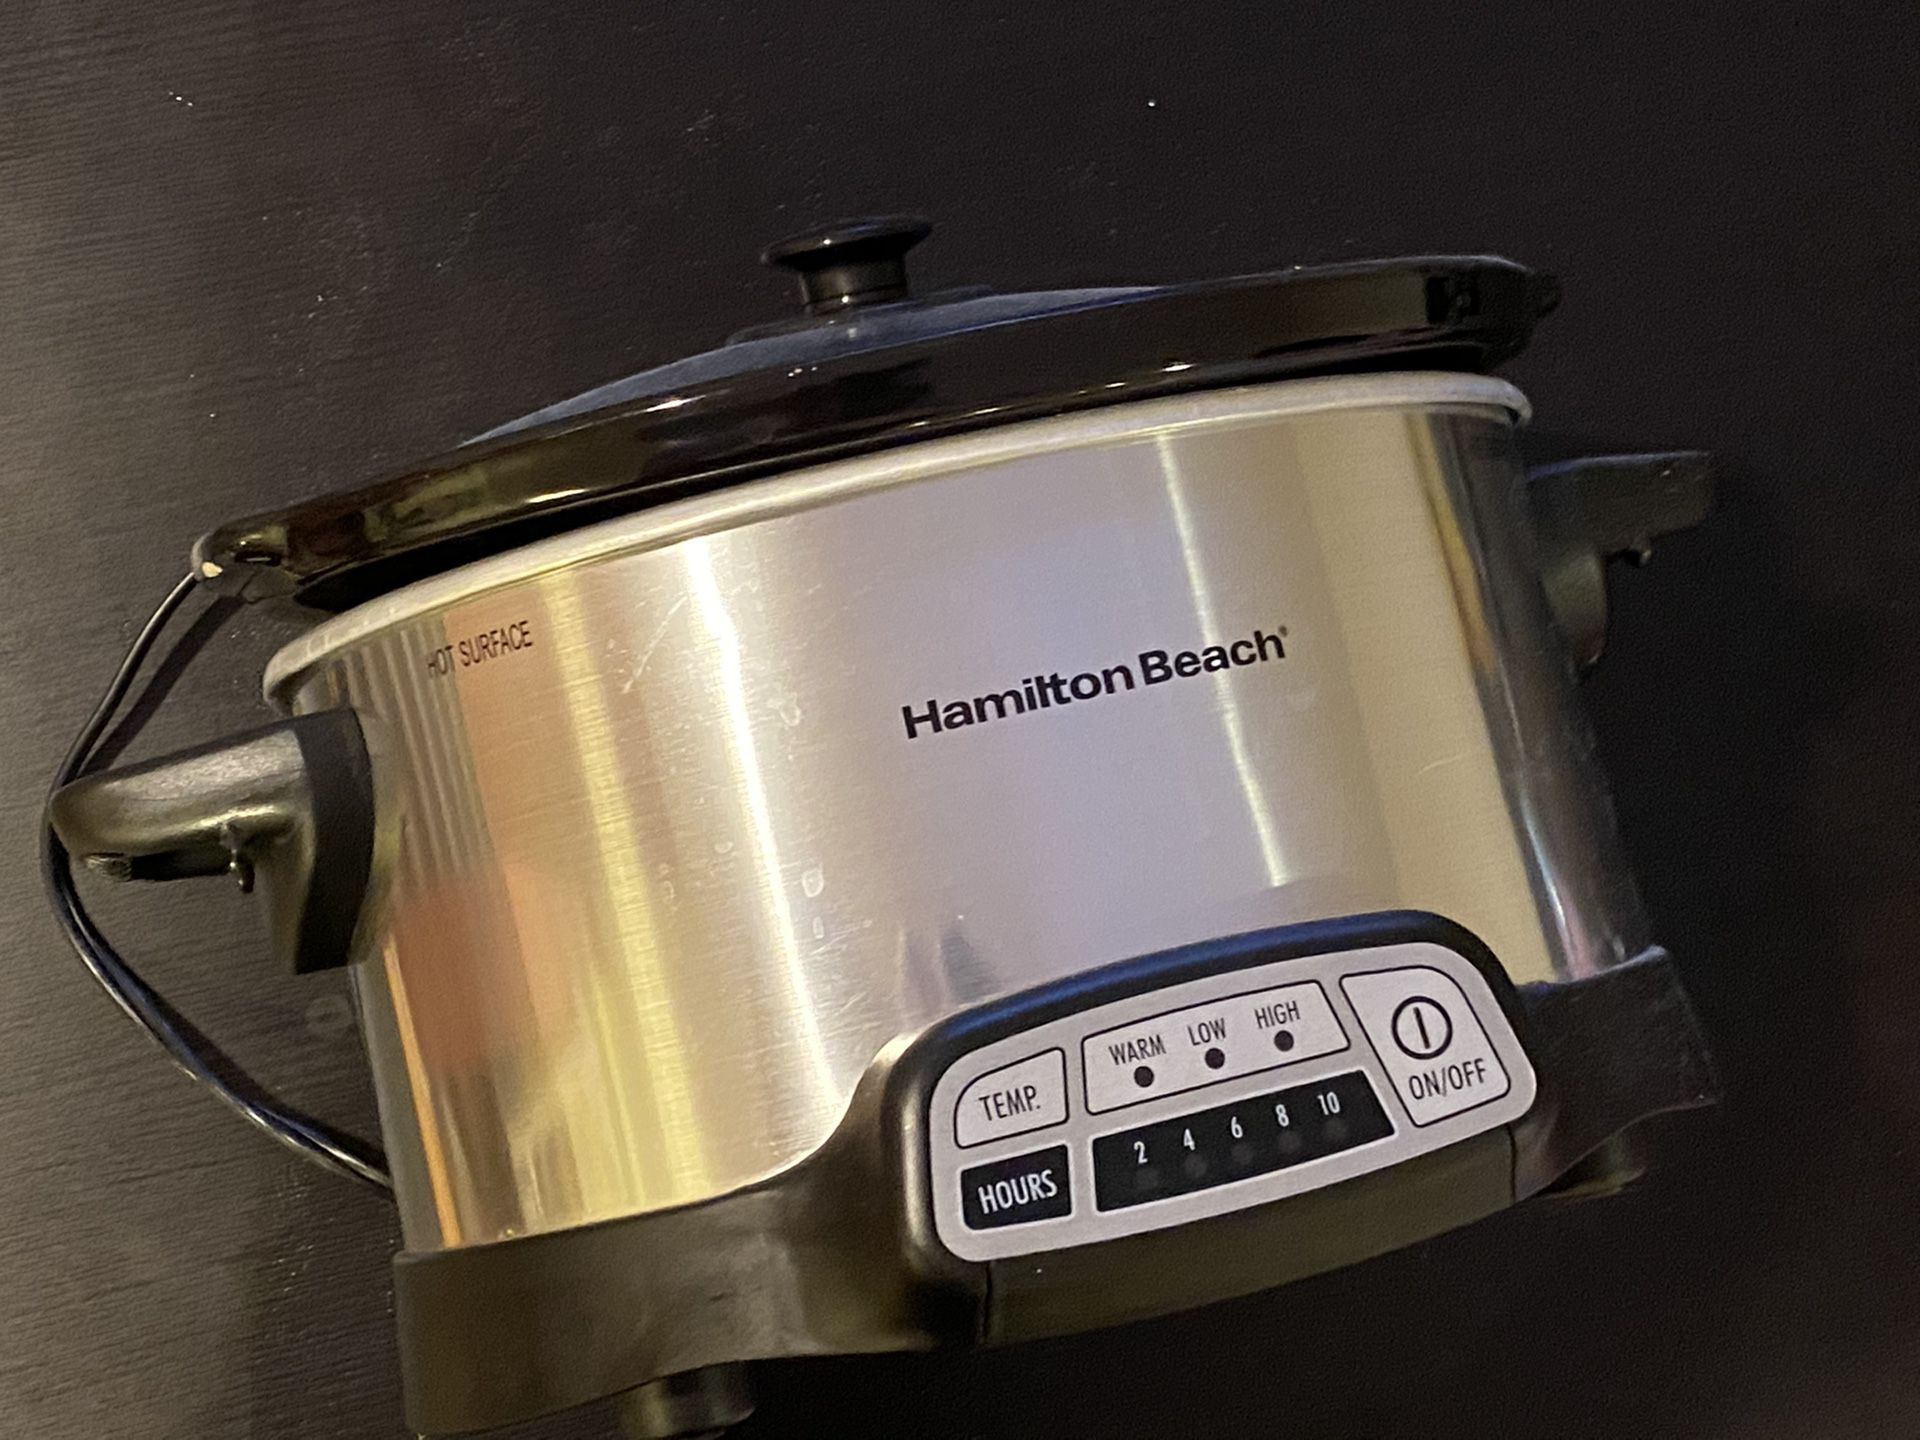 Hamilton Beach 7-Quart Programmable Slow Cooker with flexible easy programming, dishwasher-safe crock &lid, Silver